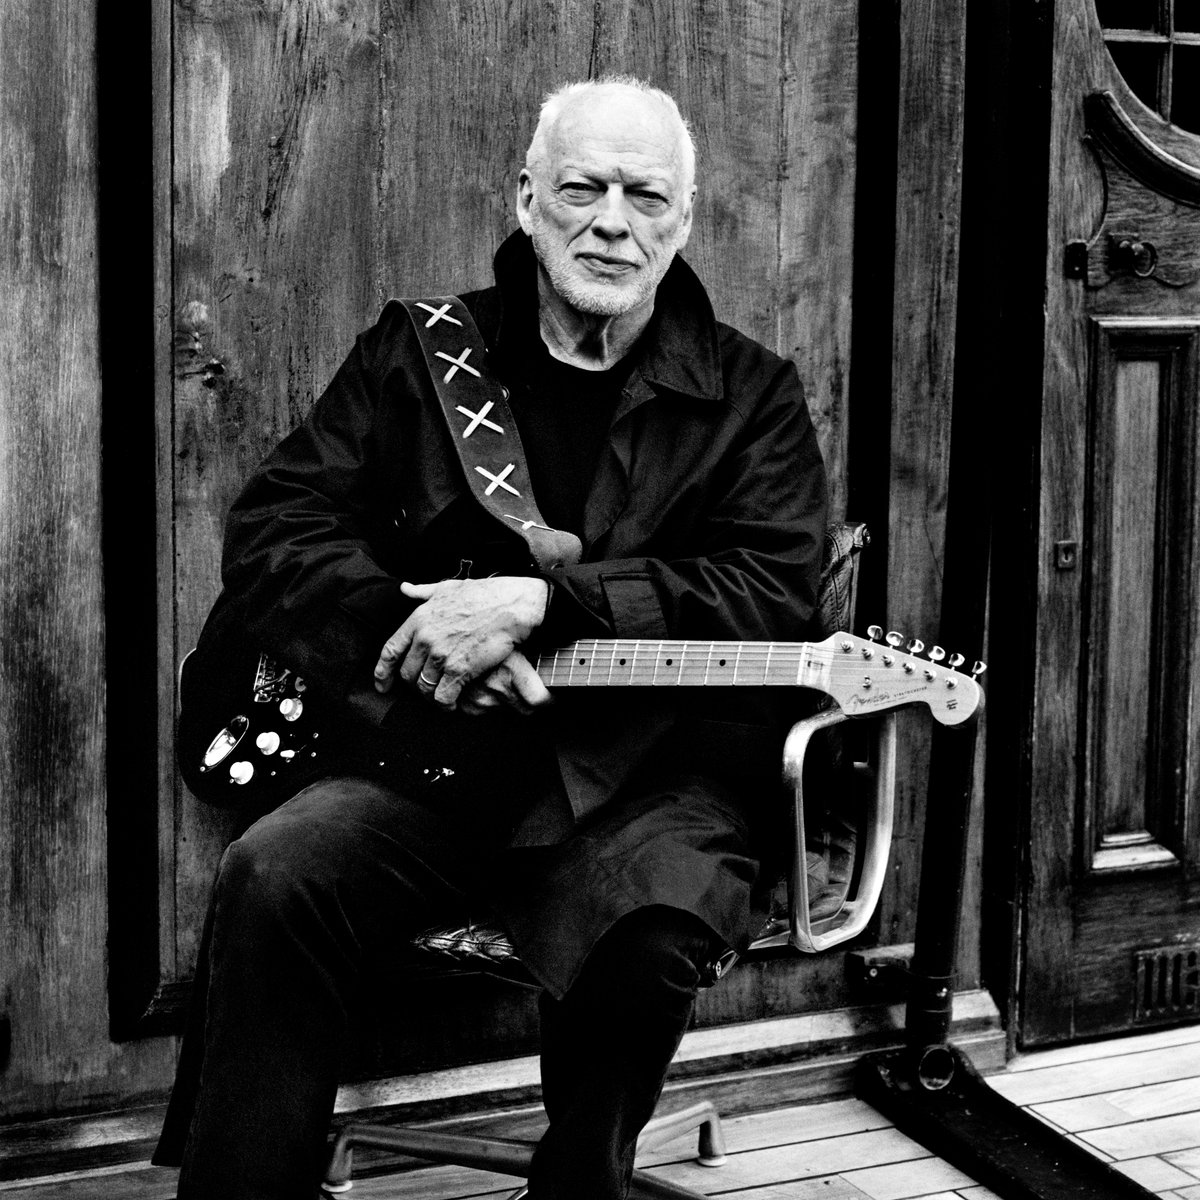 David Gilmour has announced the release of his first new album in nine years. Entitled Luck and Strange, it will be released on September 6th → cos.lv/AHSS50Rngx2